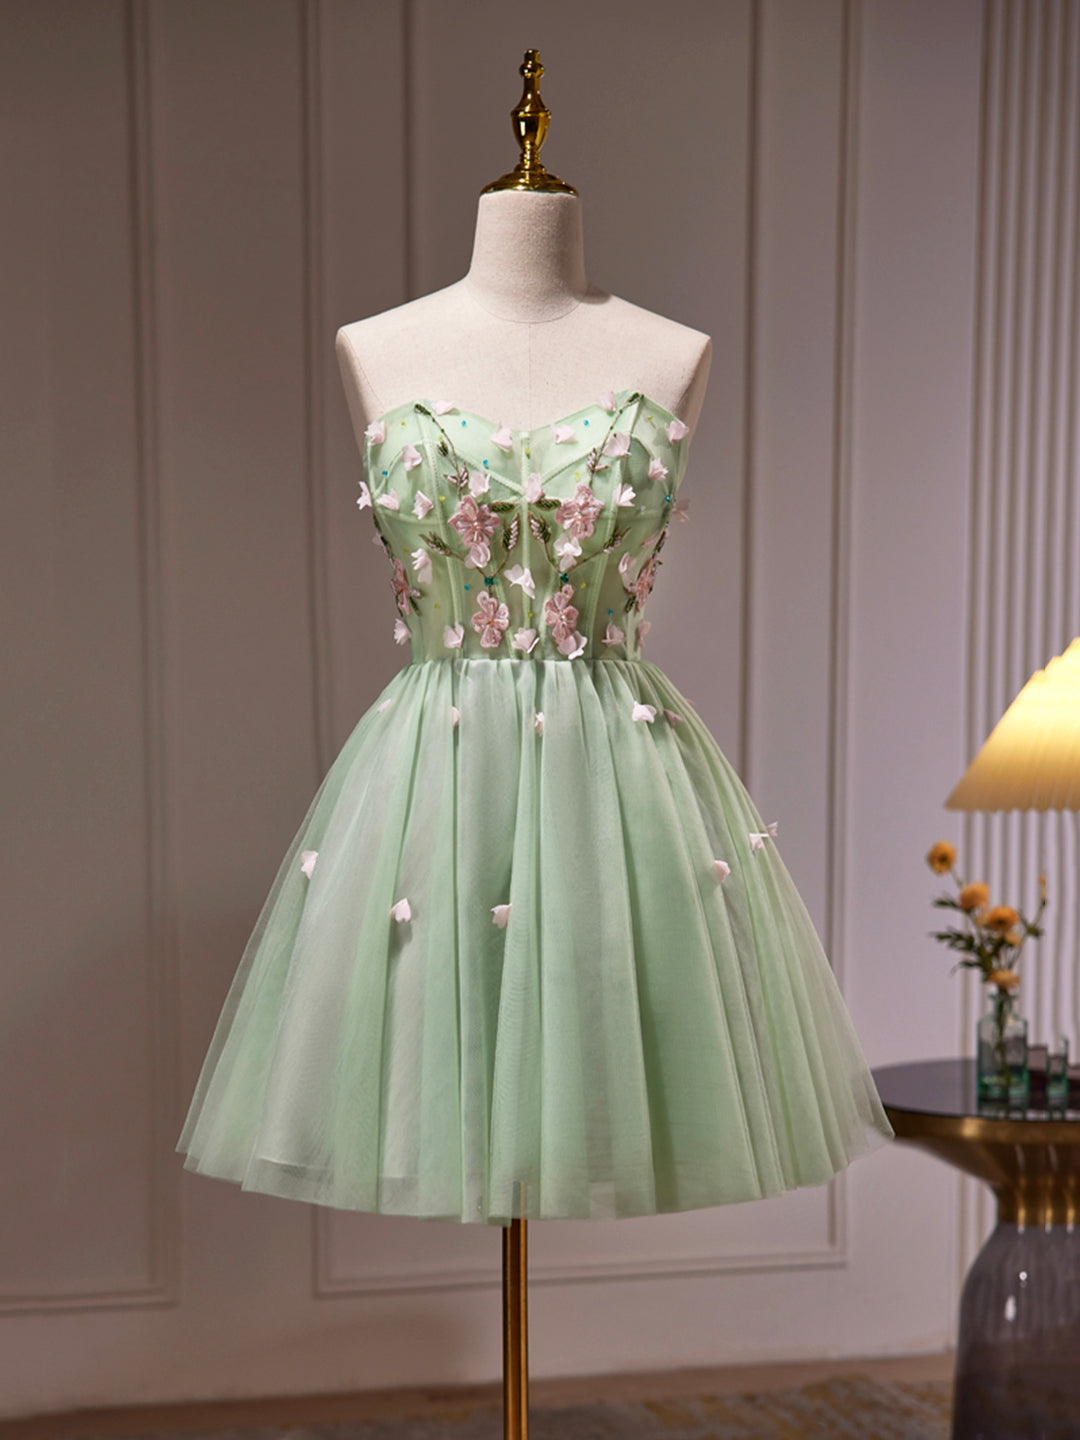 Green Tulle Beaded Party Dress, Green Short Corset Prom Dress with Flowers outfit, Prom Dresses Blues